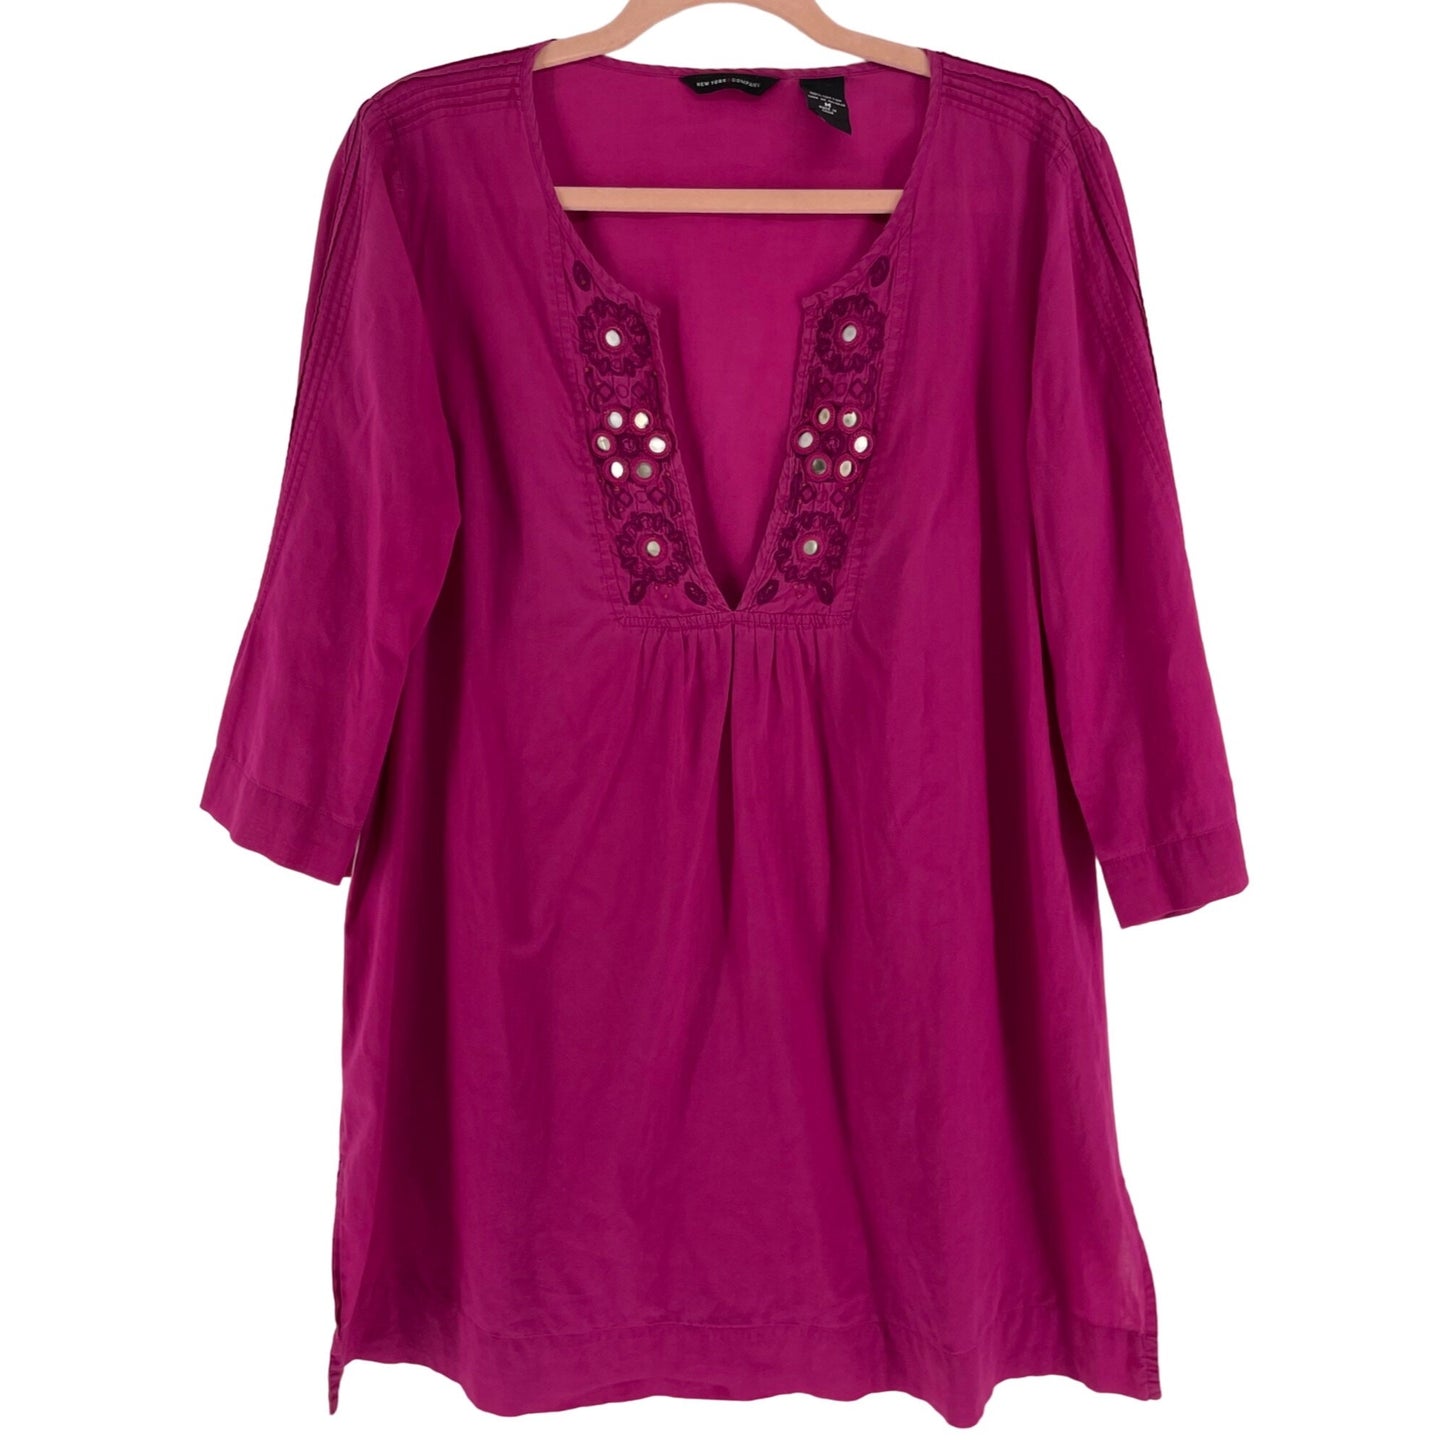 New York & Company Women's Size Medium Fuchsia Floral Embroidered Beach Cover-Up